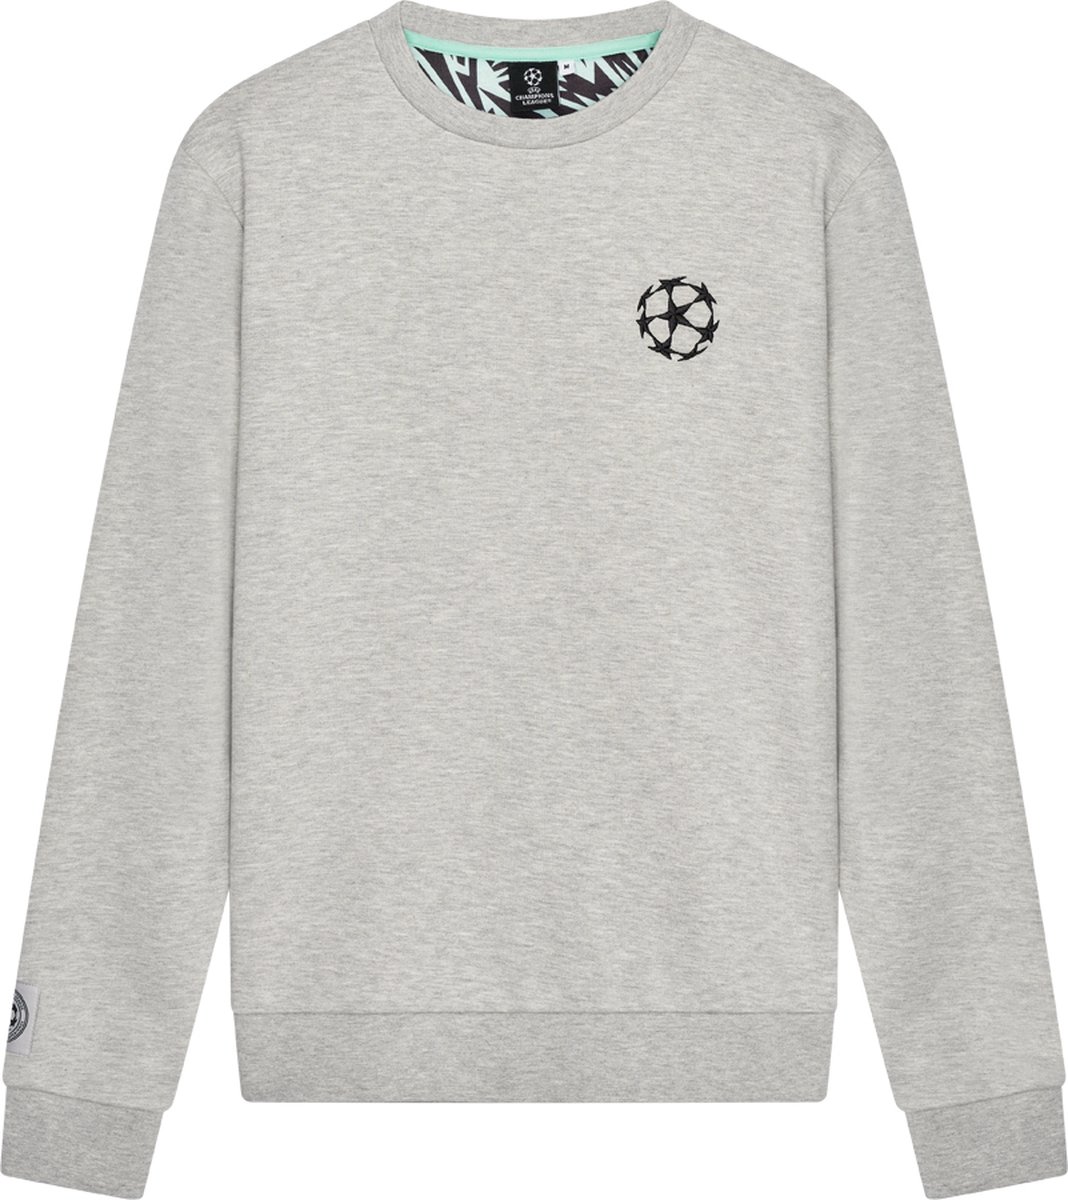 Champions League lifestyle sweater - maat L